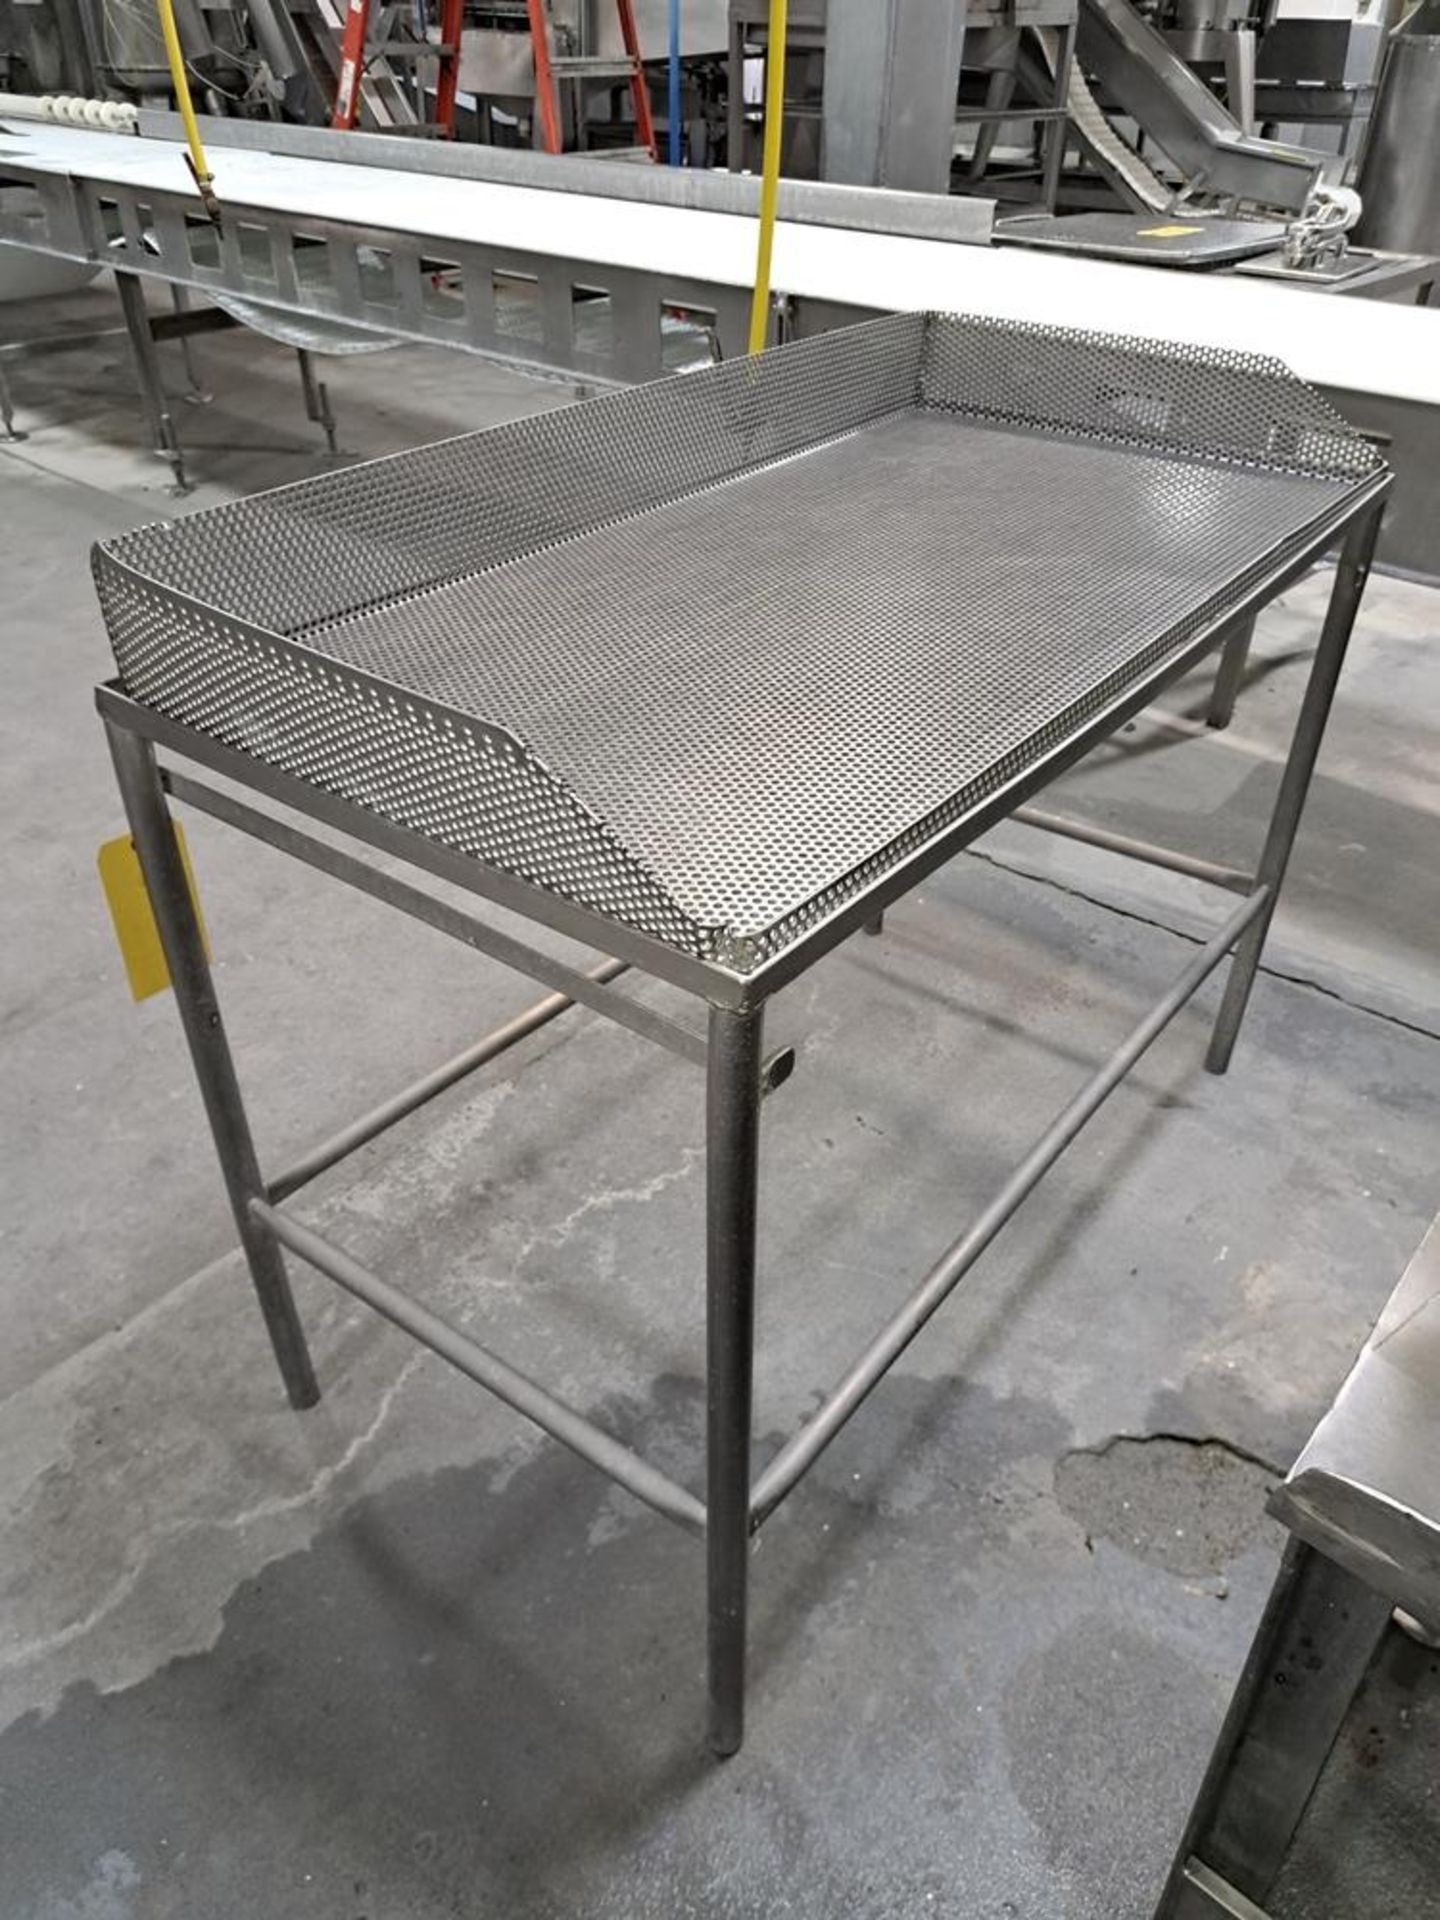 Stainless Steel Inspection Table, 24" W X 48" L: Required Loading Fee $75.00, Rigger-Norm Pavlish,